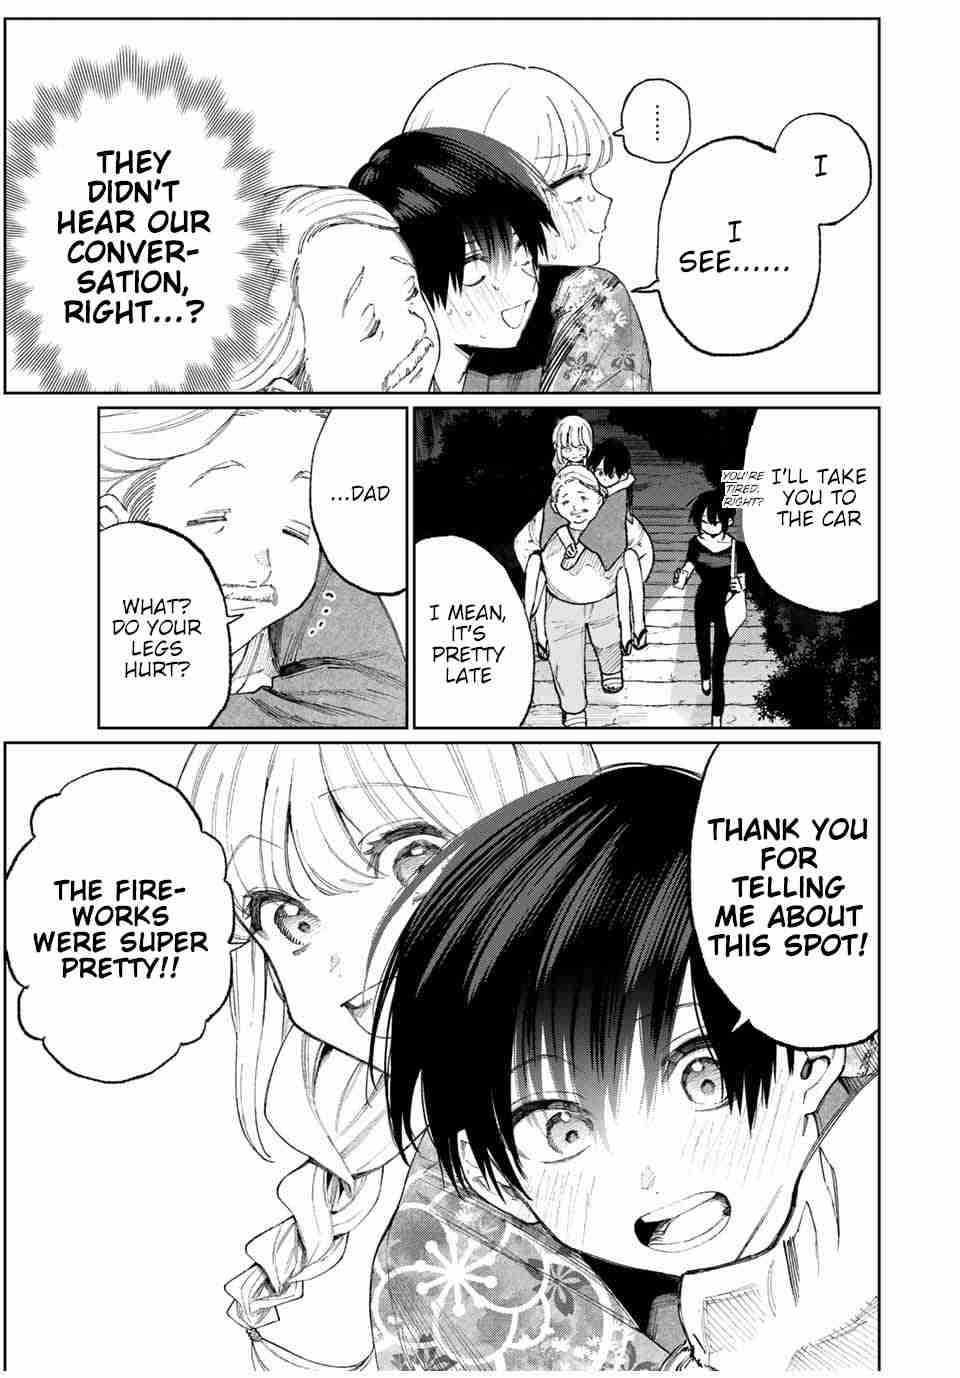 That Girl Is Not Just Cute Vol. 3 Ch. 35